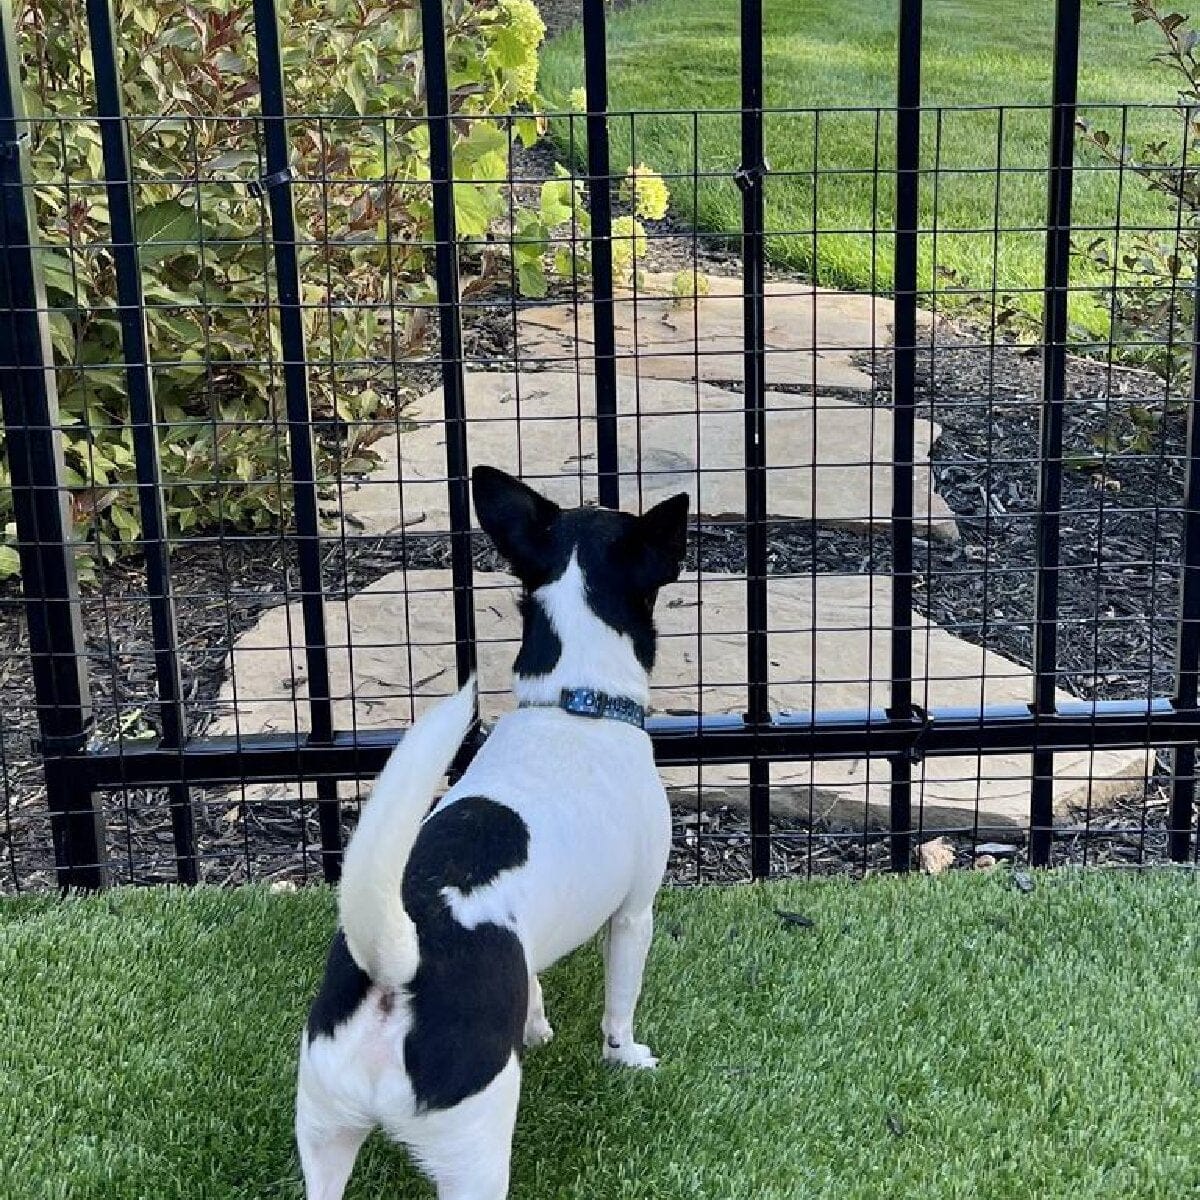 Wide gap fence barrier from Dog Proofer designed to prevent pets from slipping through larger fence openings.